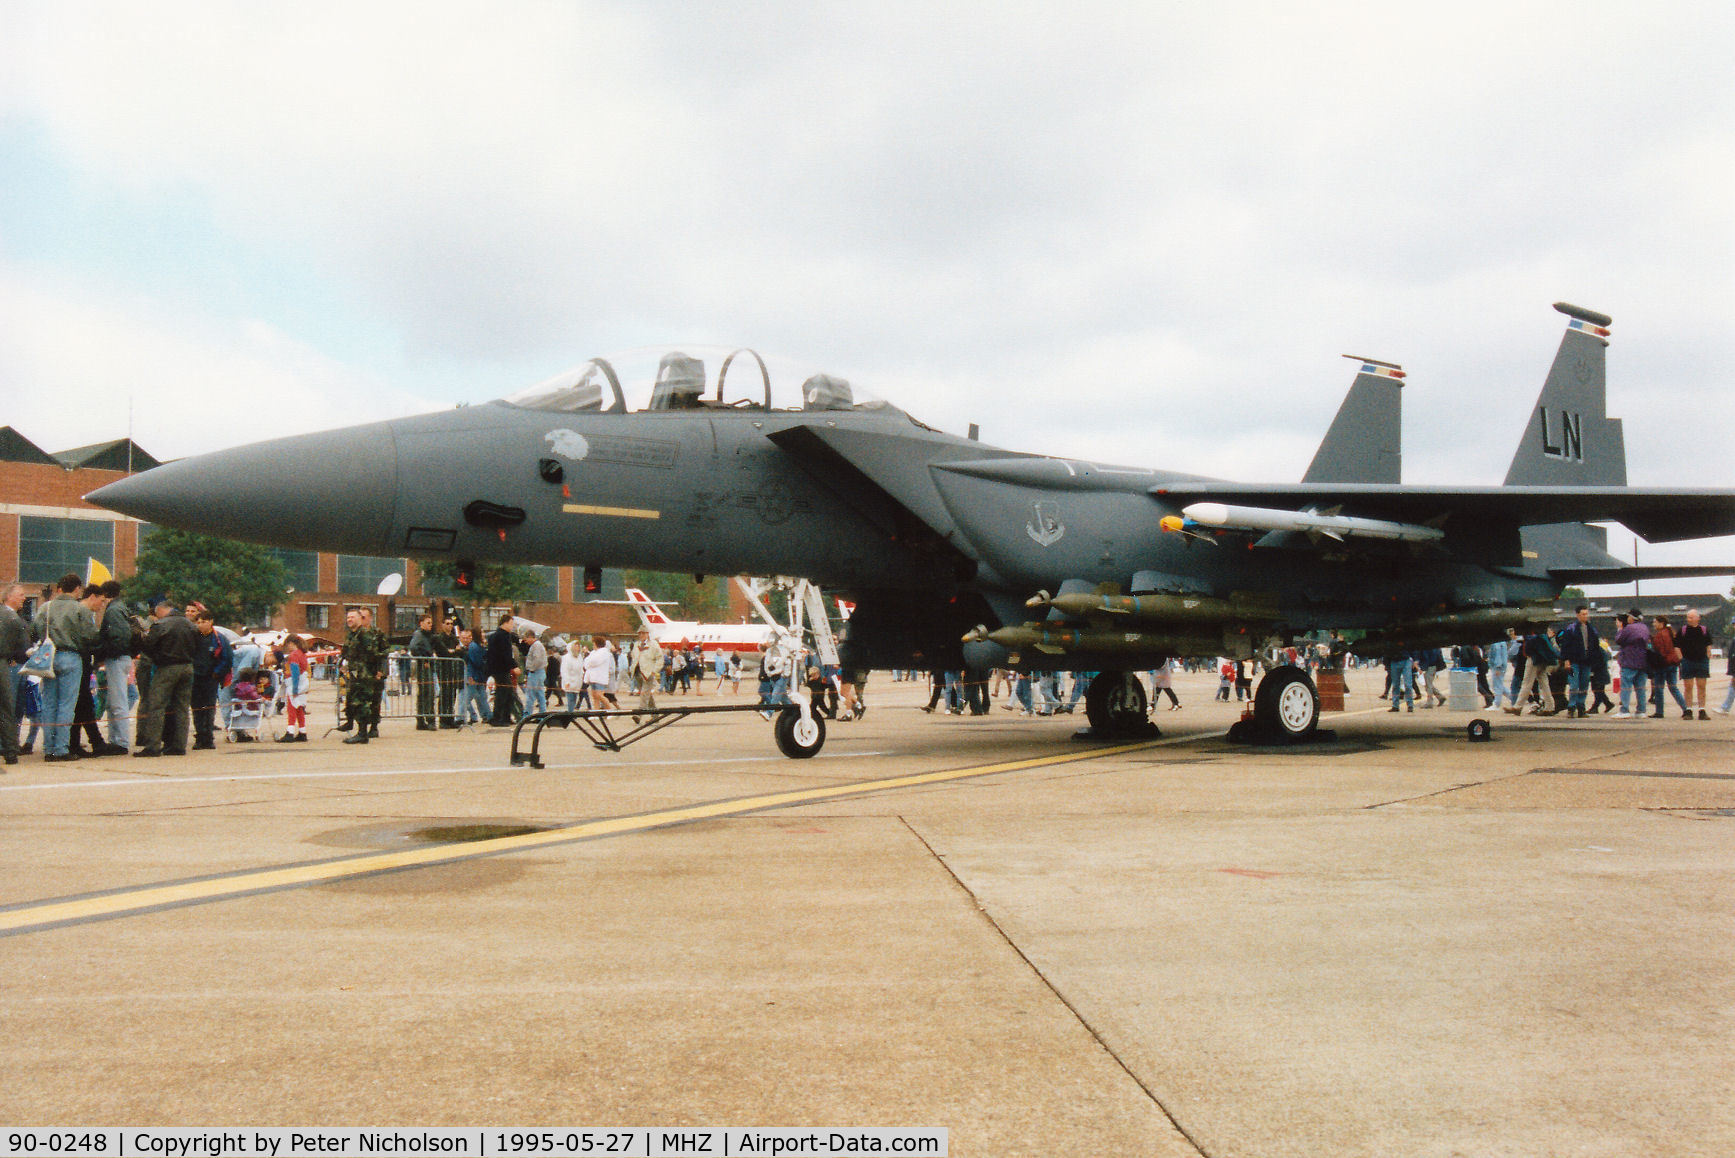 90-0248, 1990 McDonnell Douglas F-15E Strike Eagle C/N 1183/E150, F-15E Strike Eagle, callsign Brew 01, of RAF Lakenheath's 492nd Fighter Squadron/48th Fighter Wing on display at the 1995 RAF Mildenhall Air Fete.